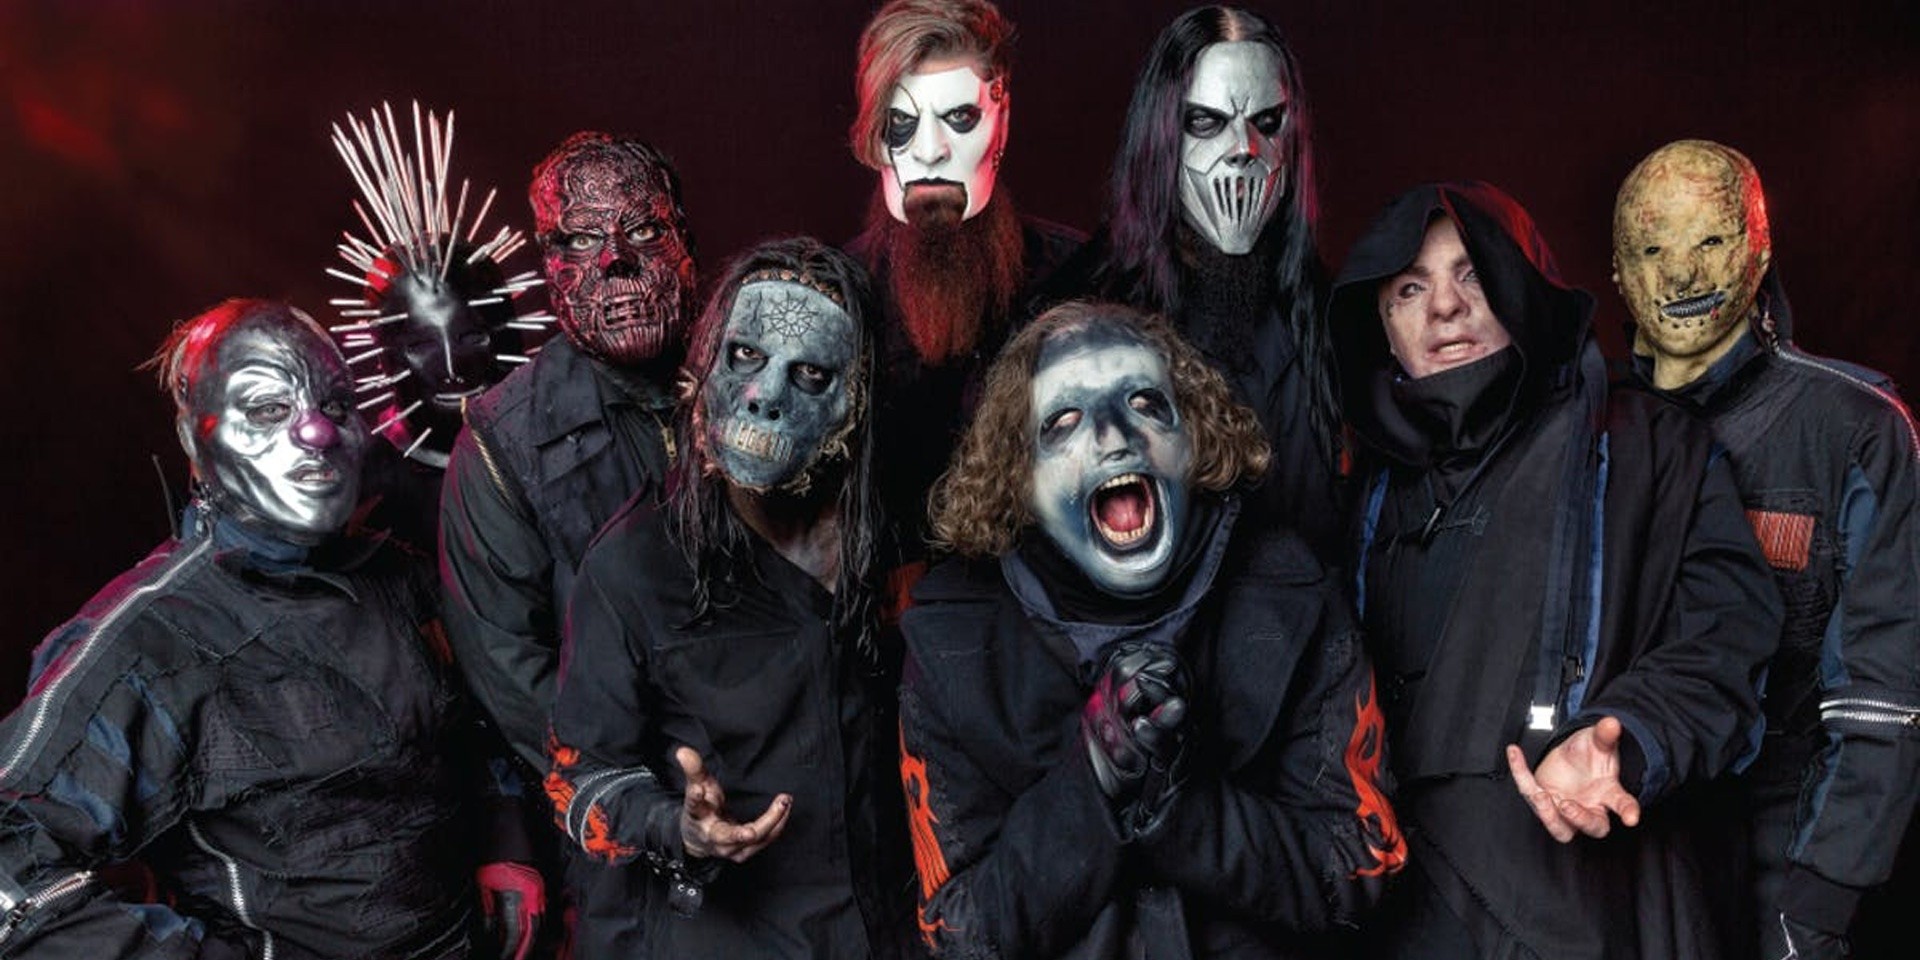 Tickets to Slipknot's Manila 2020 concert are available now